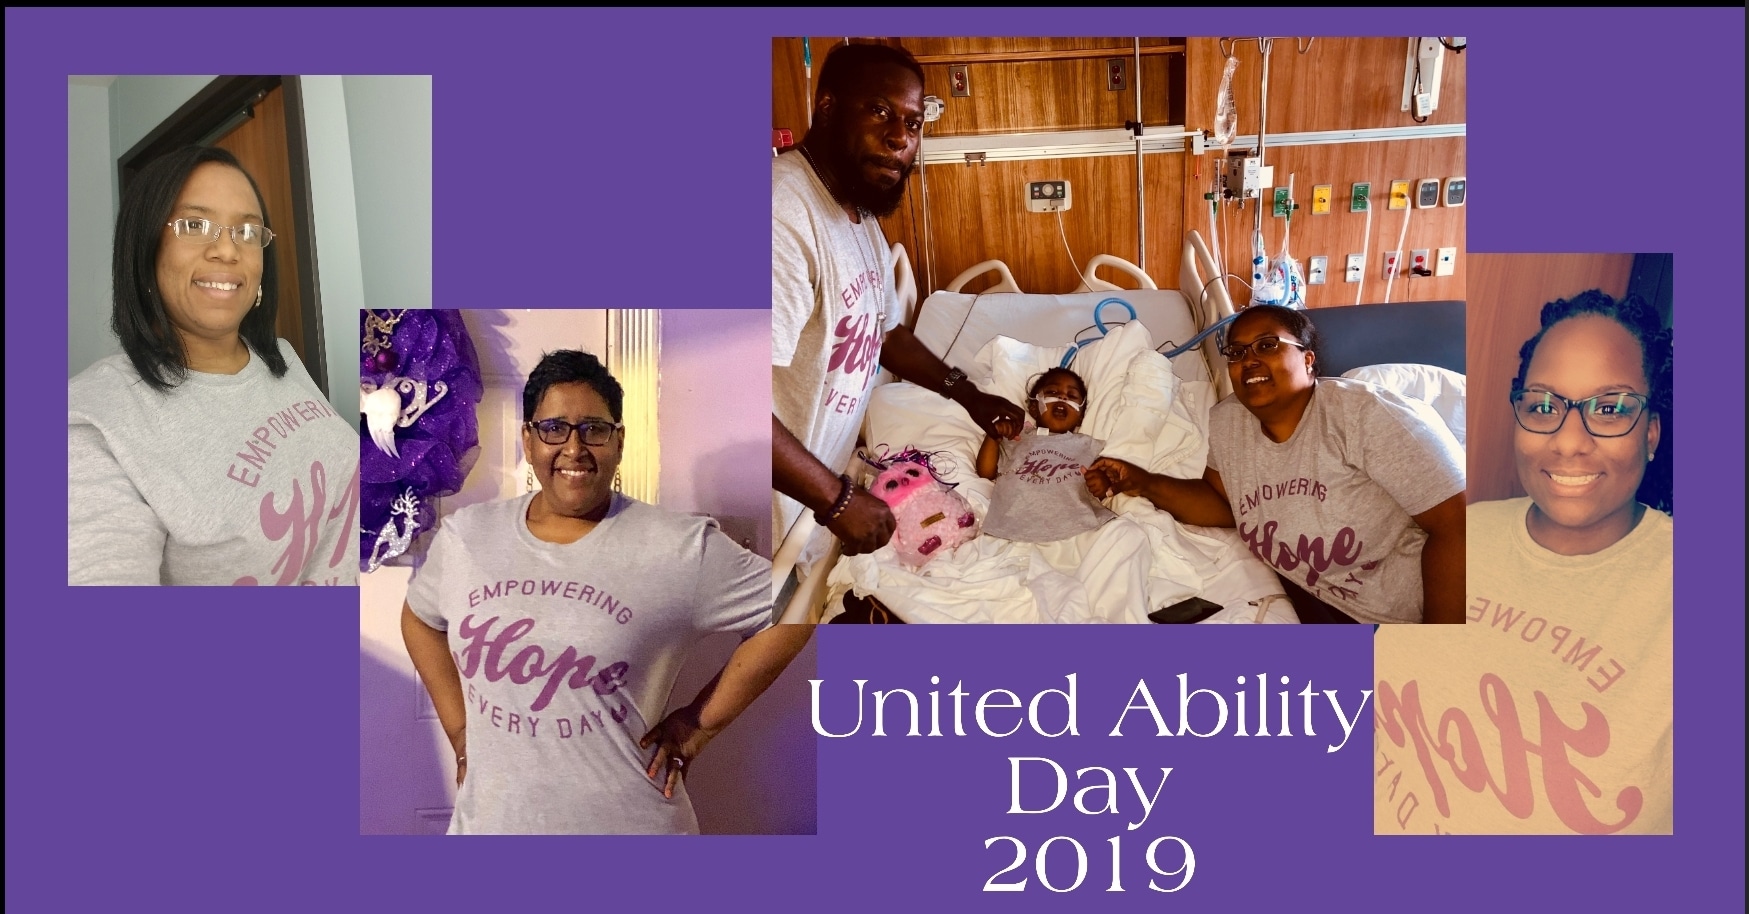 United Ability 2020 4 Celebrate United Ability Day with Leah and her family on July 17